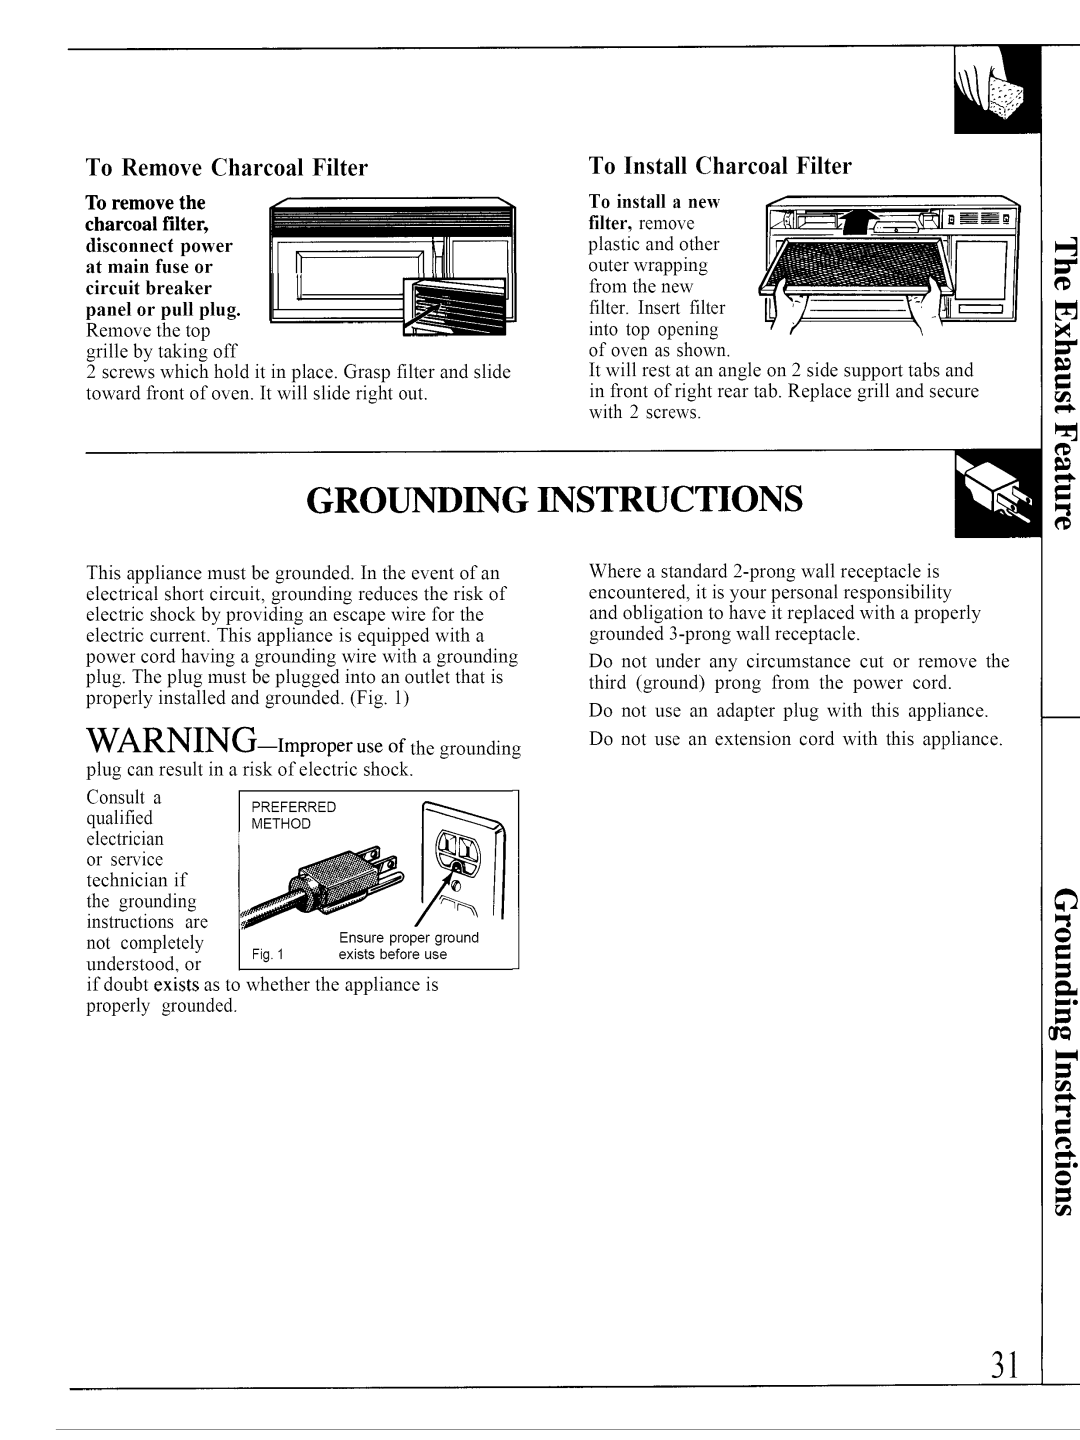 GE JVM140K Grounding Instructions, To remove the charcoal filter, disconnec power at main fuse or, panel or pull plug 